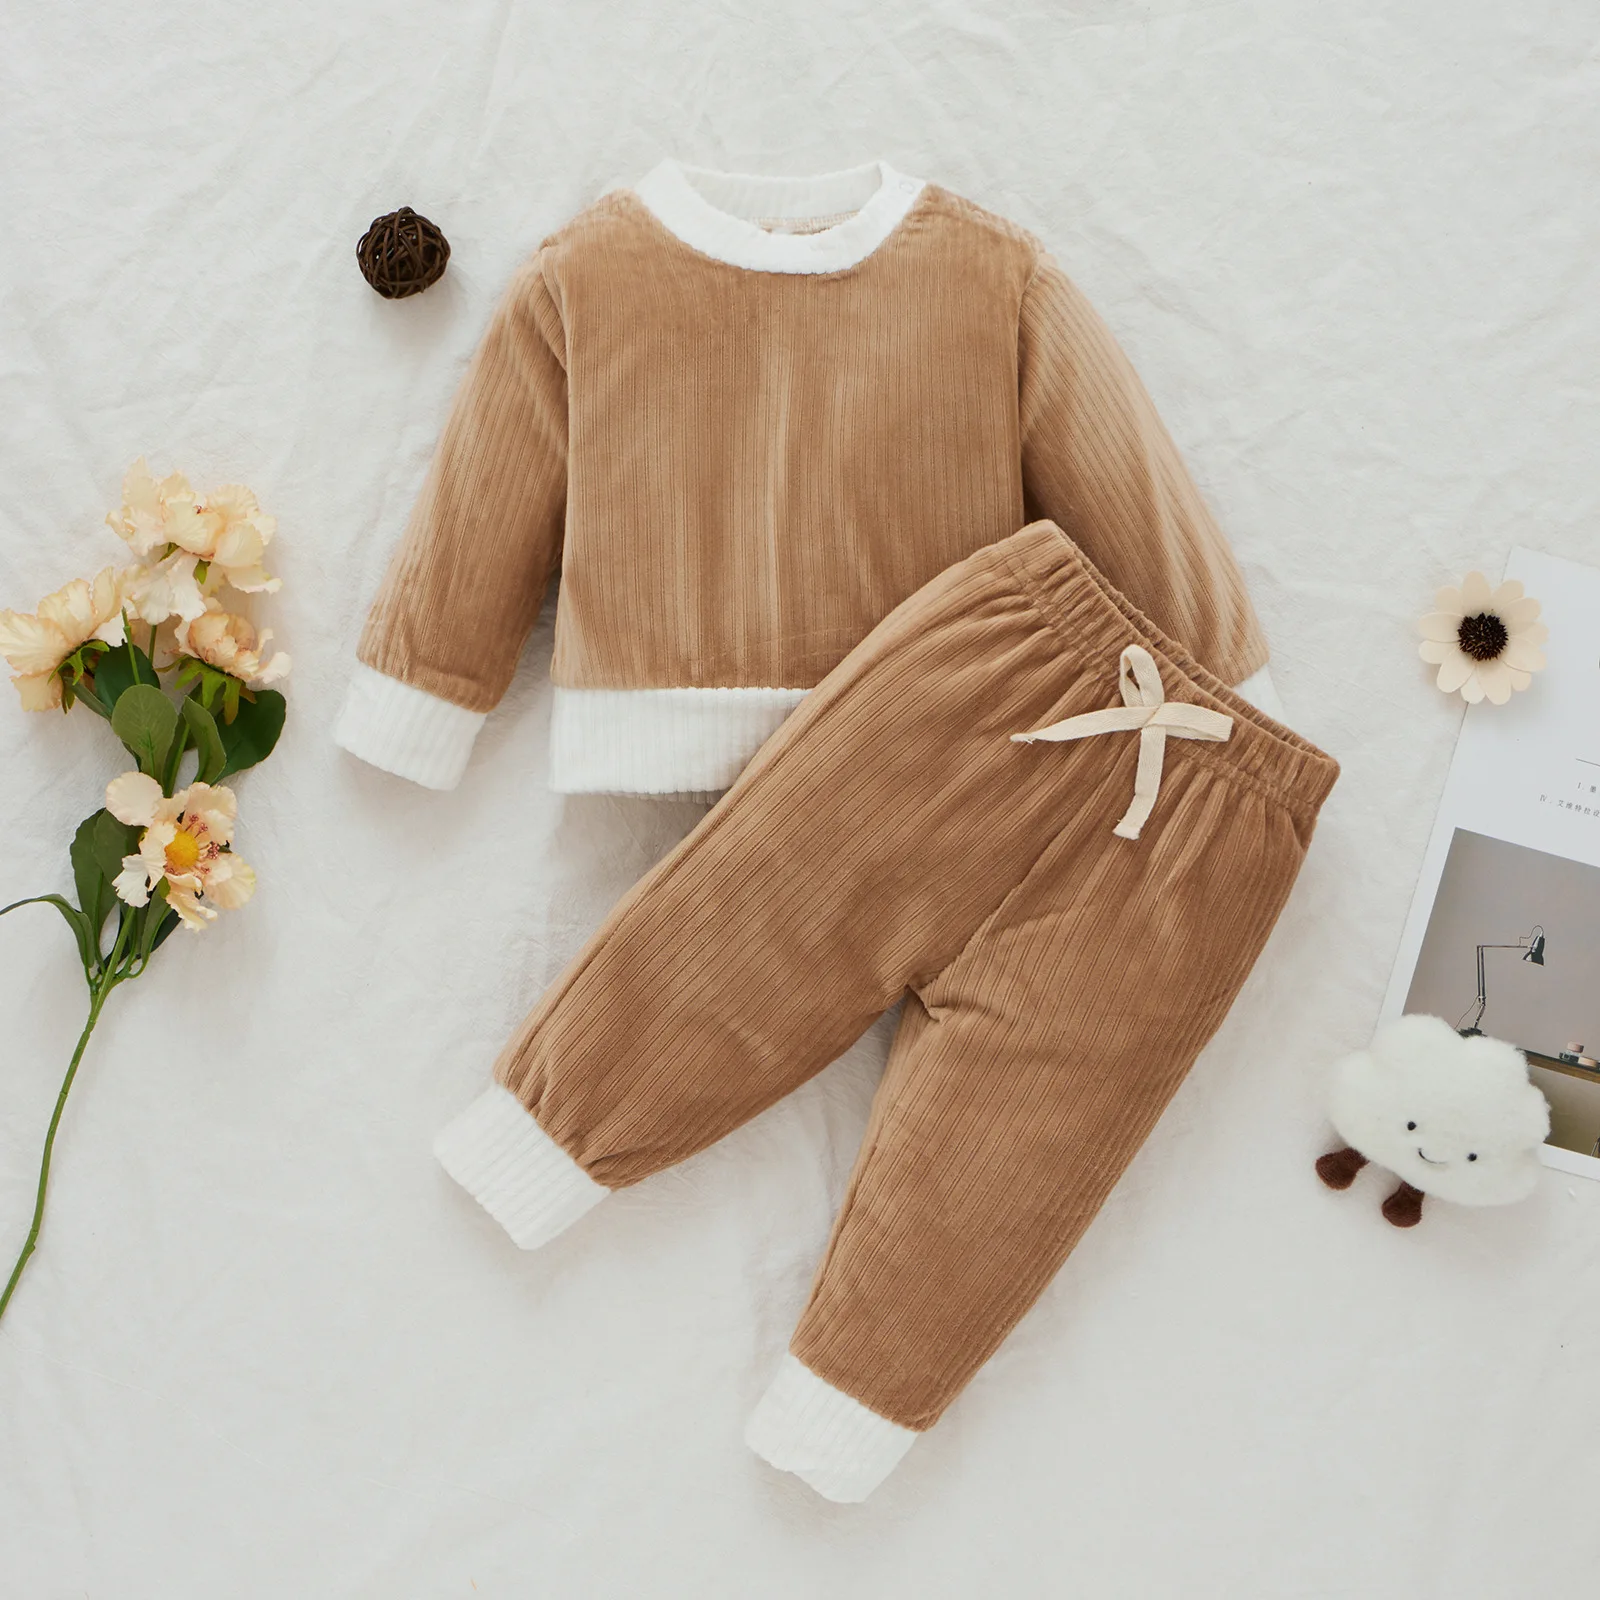 New arrival infant toddler girls clothing sets long sleeve sweatshirt+pants two piece boys girls clothing sets